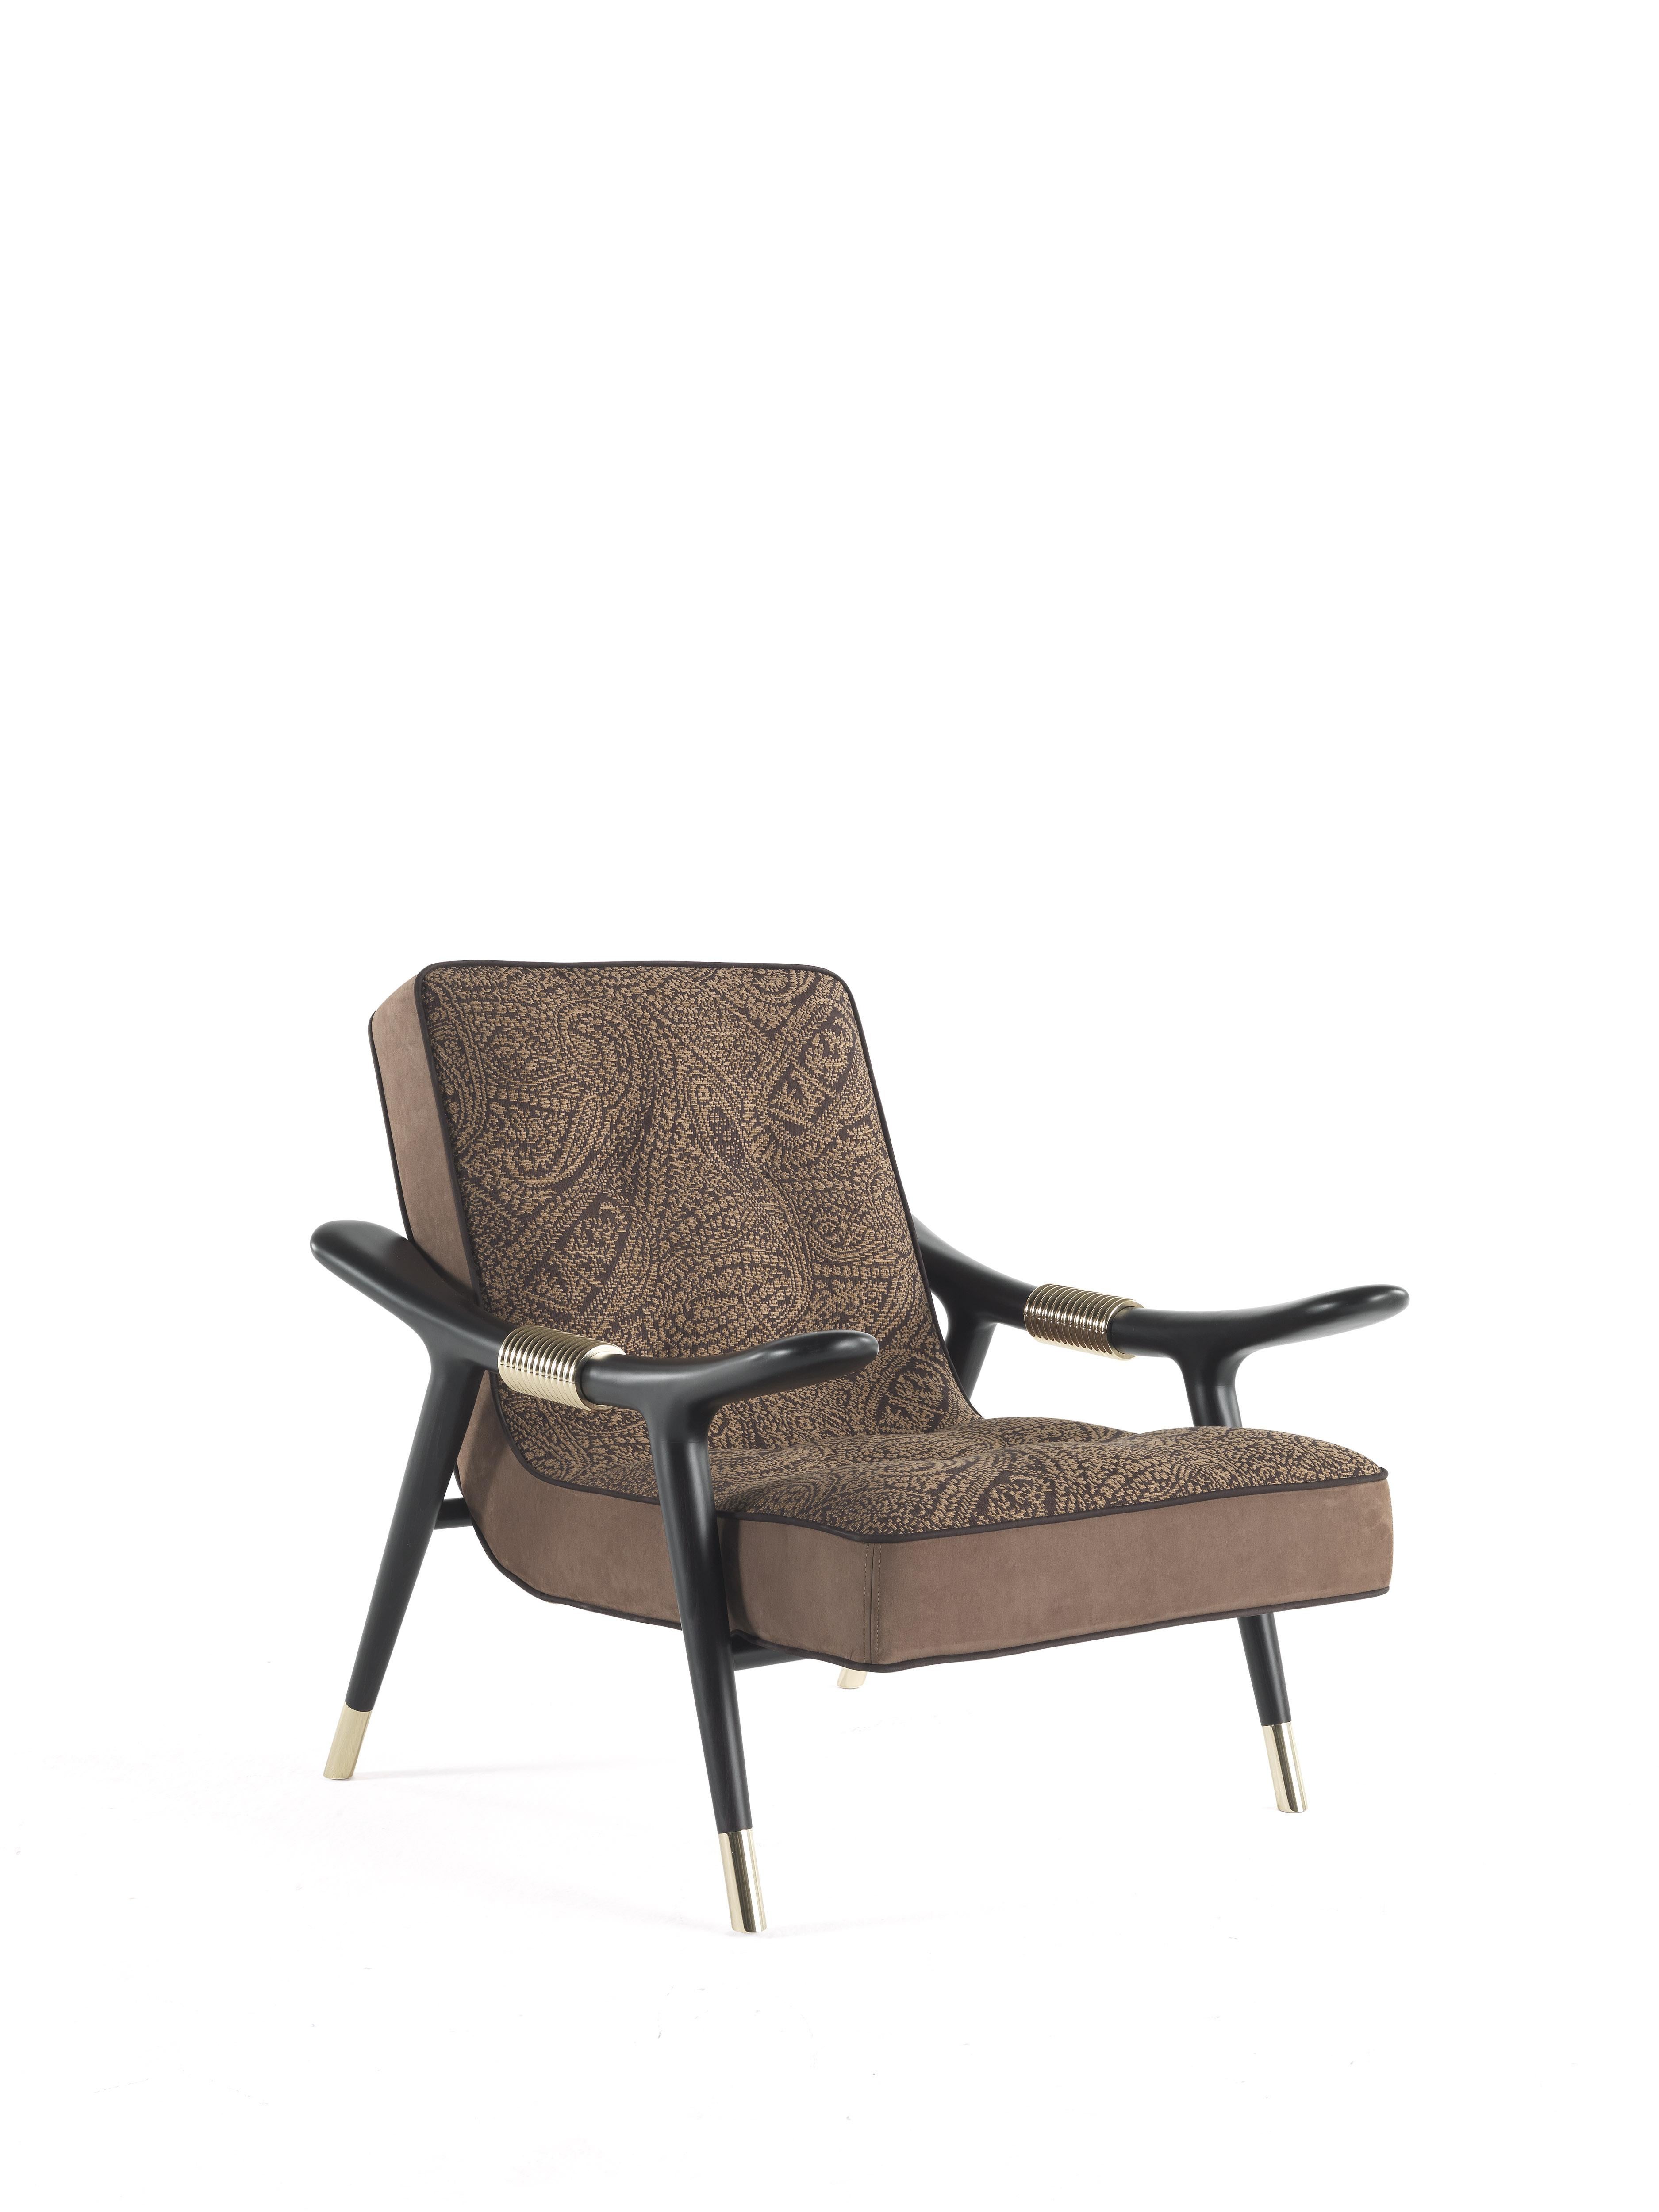 Emblematic of the ethnic mood of the ETRO Home Interiors 2019 collection, the Masai armchair is a tribute to Africa: the reference to the African continent can be found in its shape and in the detail of the polished brass rings. Scenic and